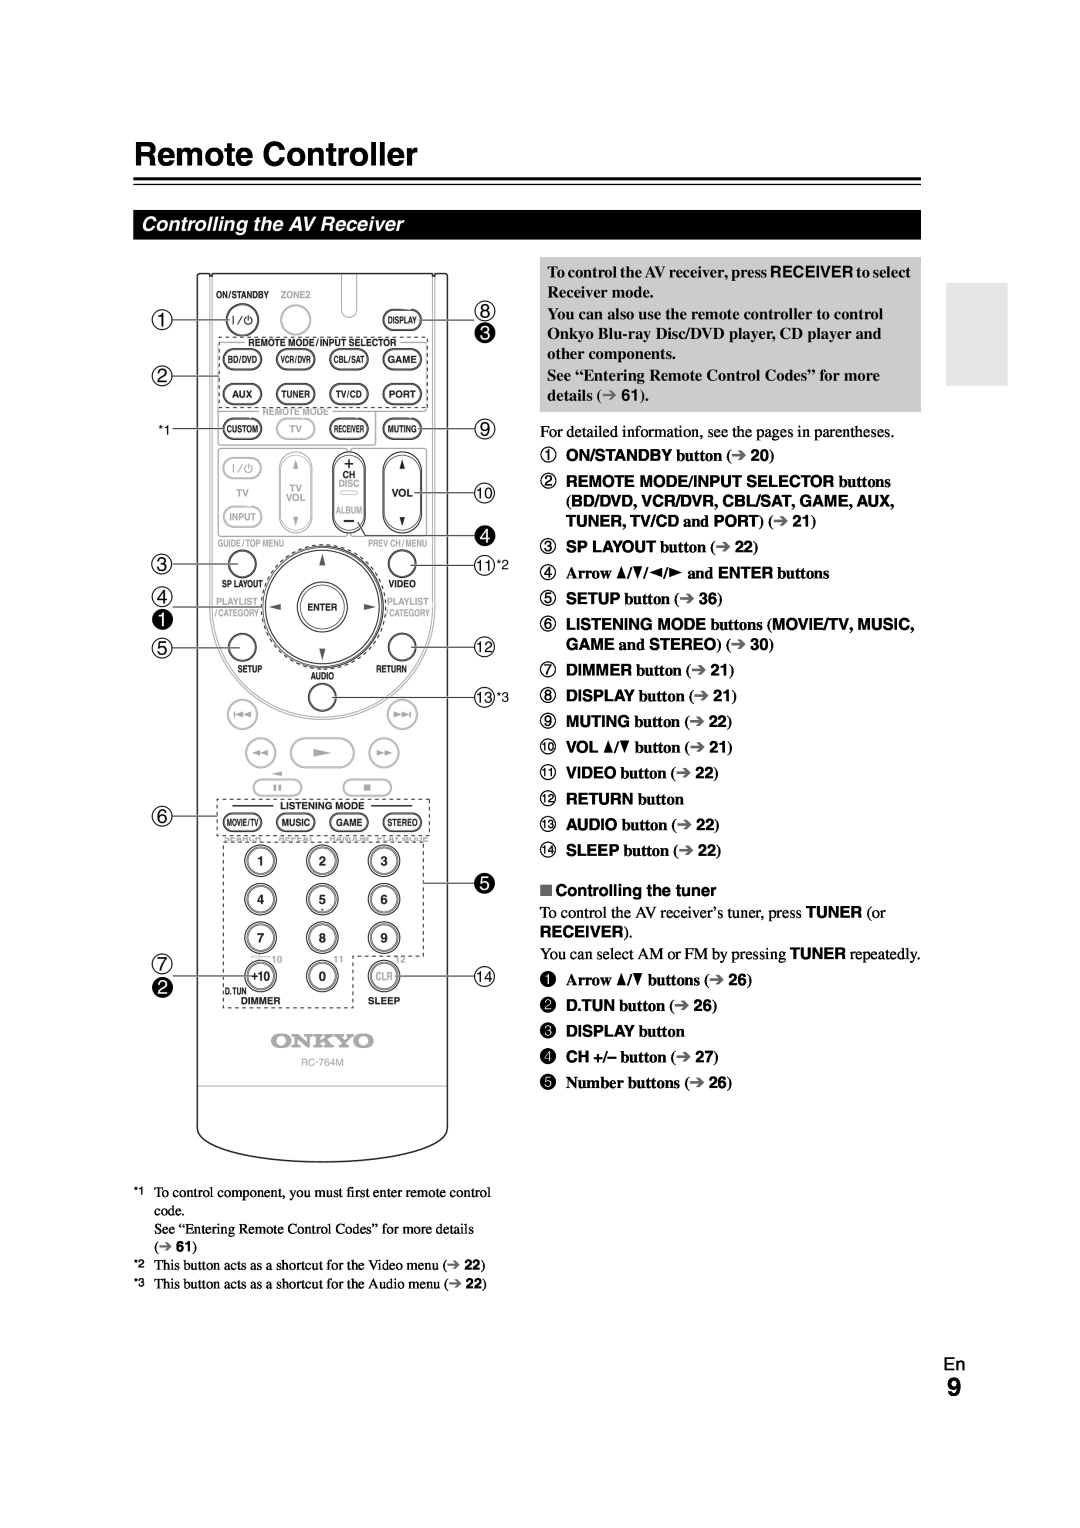 Onkyo HT-R980 instruction manual Remote Controller 